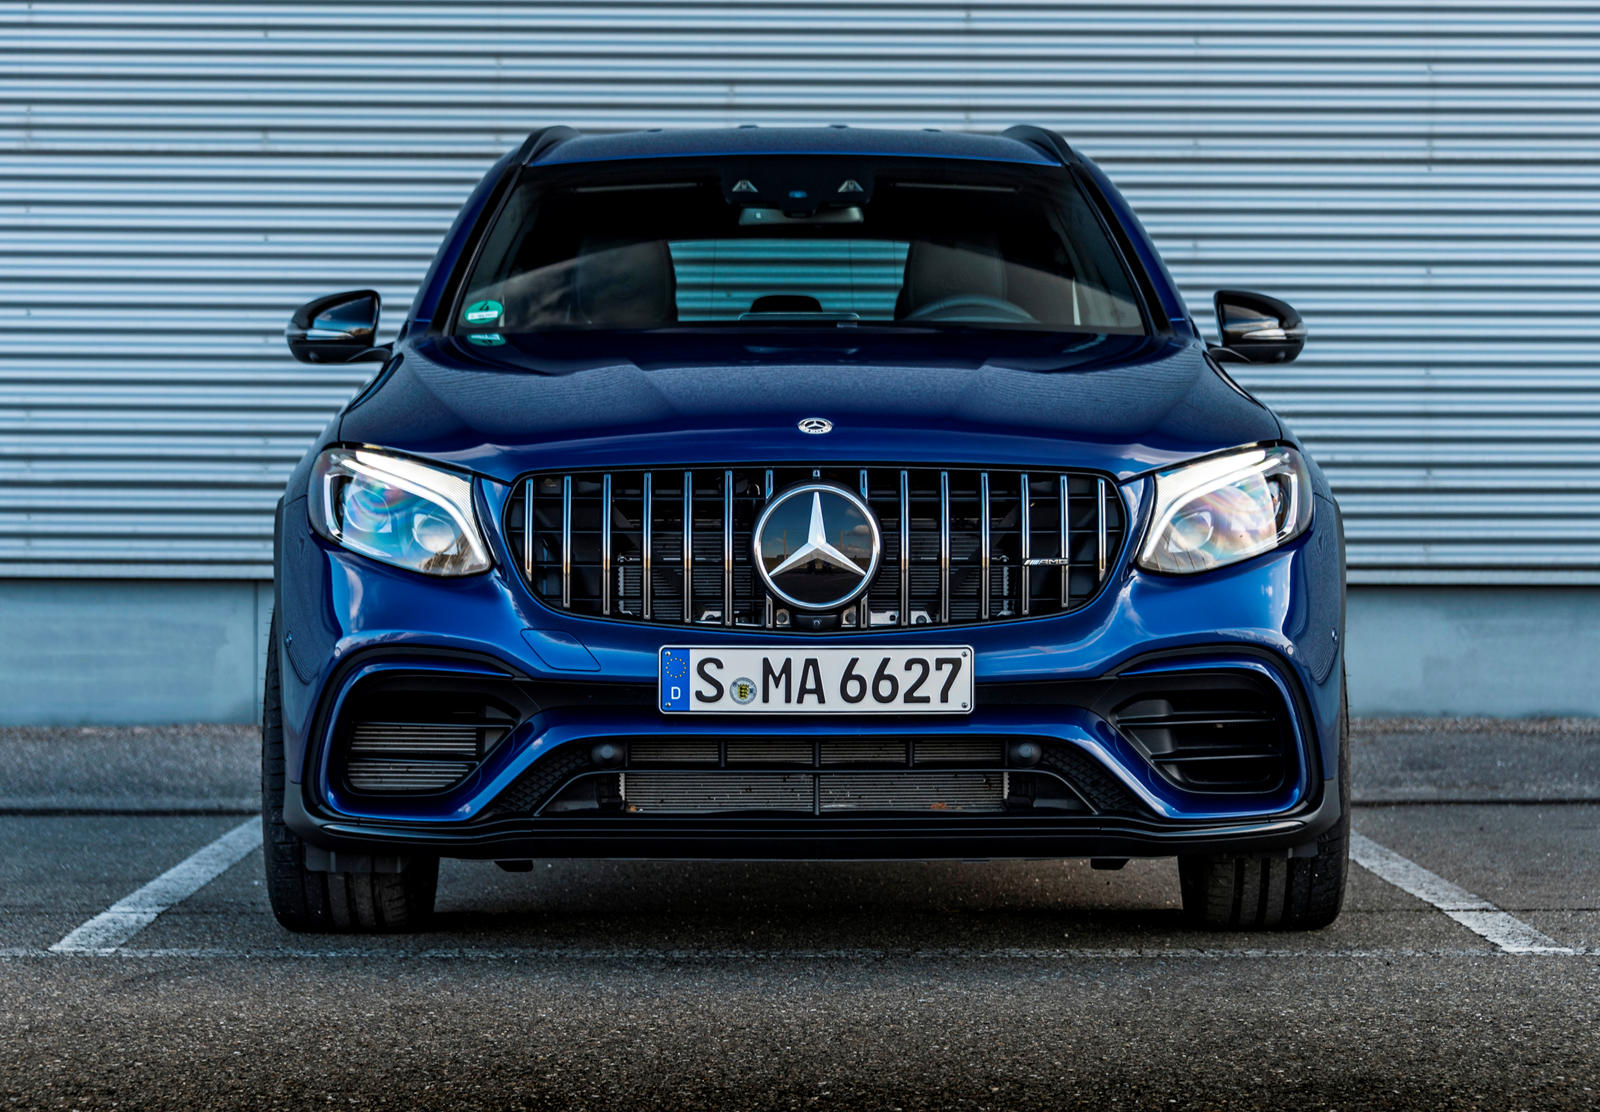 https://cdn.carbuzz.com/gallery-images/2019-mercedes-amg-glc-63-suv-front-view-carbuzz-580894-1600.jpg